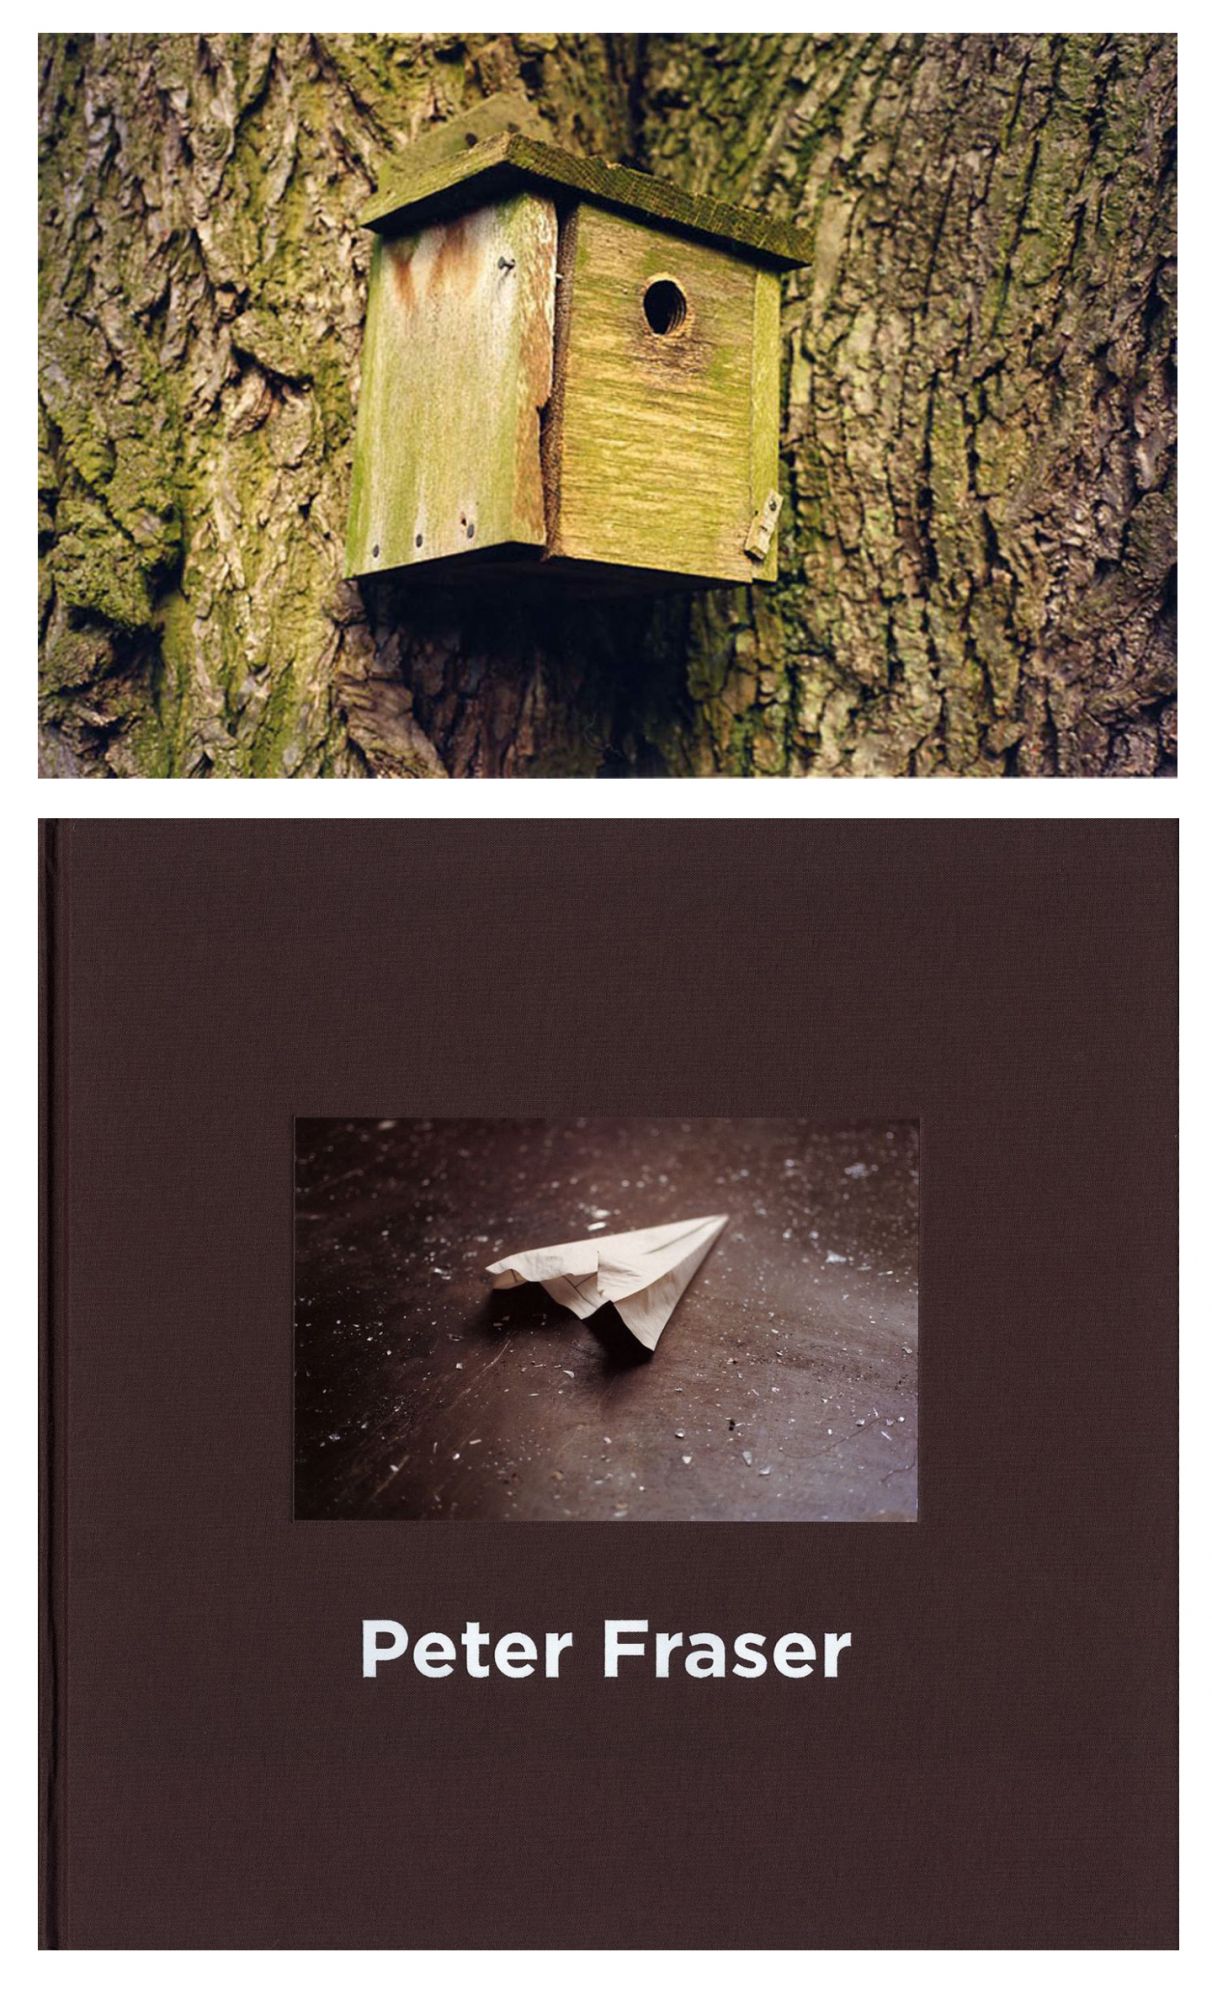 Peter Fraser (Nazraeli Press), Deluxe Limited Edition (with Type-C Print, Plate 24 "Birdhouse") [SIGNED]